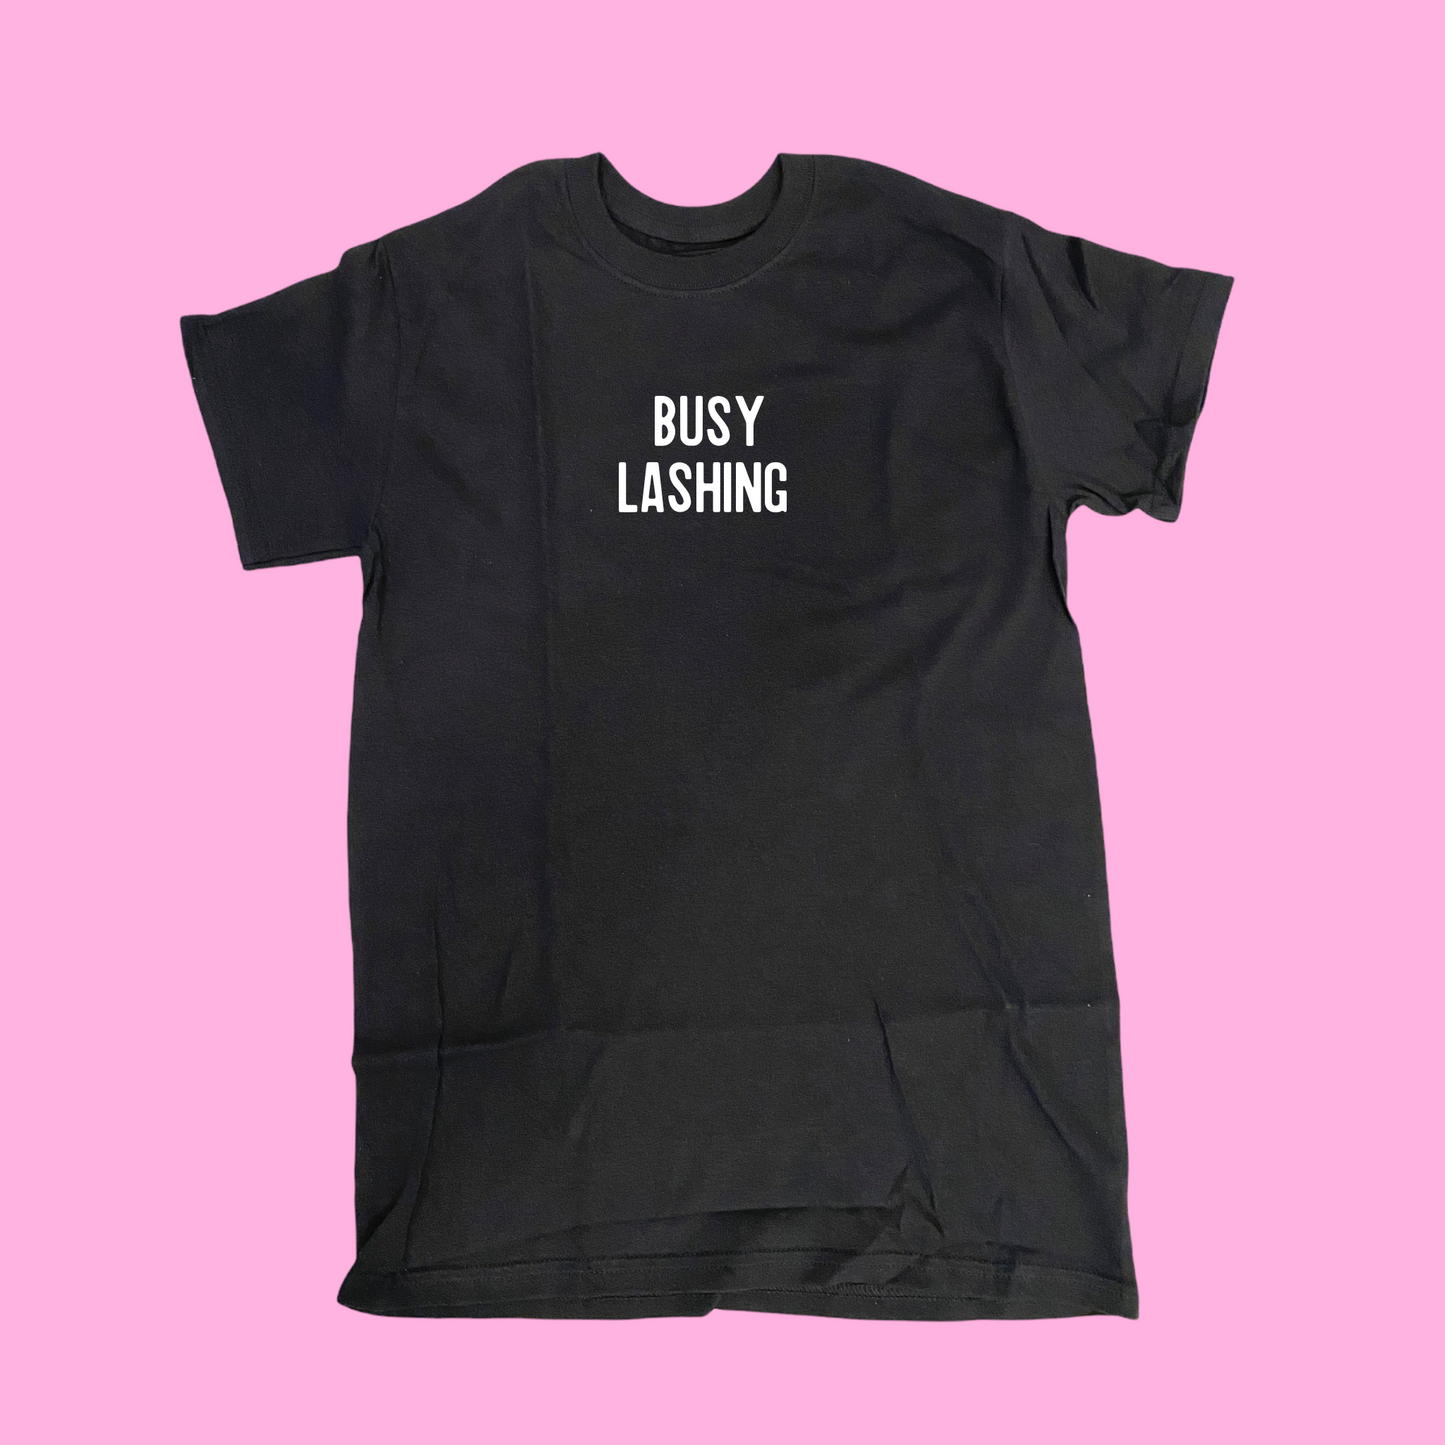 T-SHIRT - BUSY LASHING ( relaxed fit )